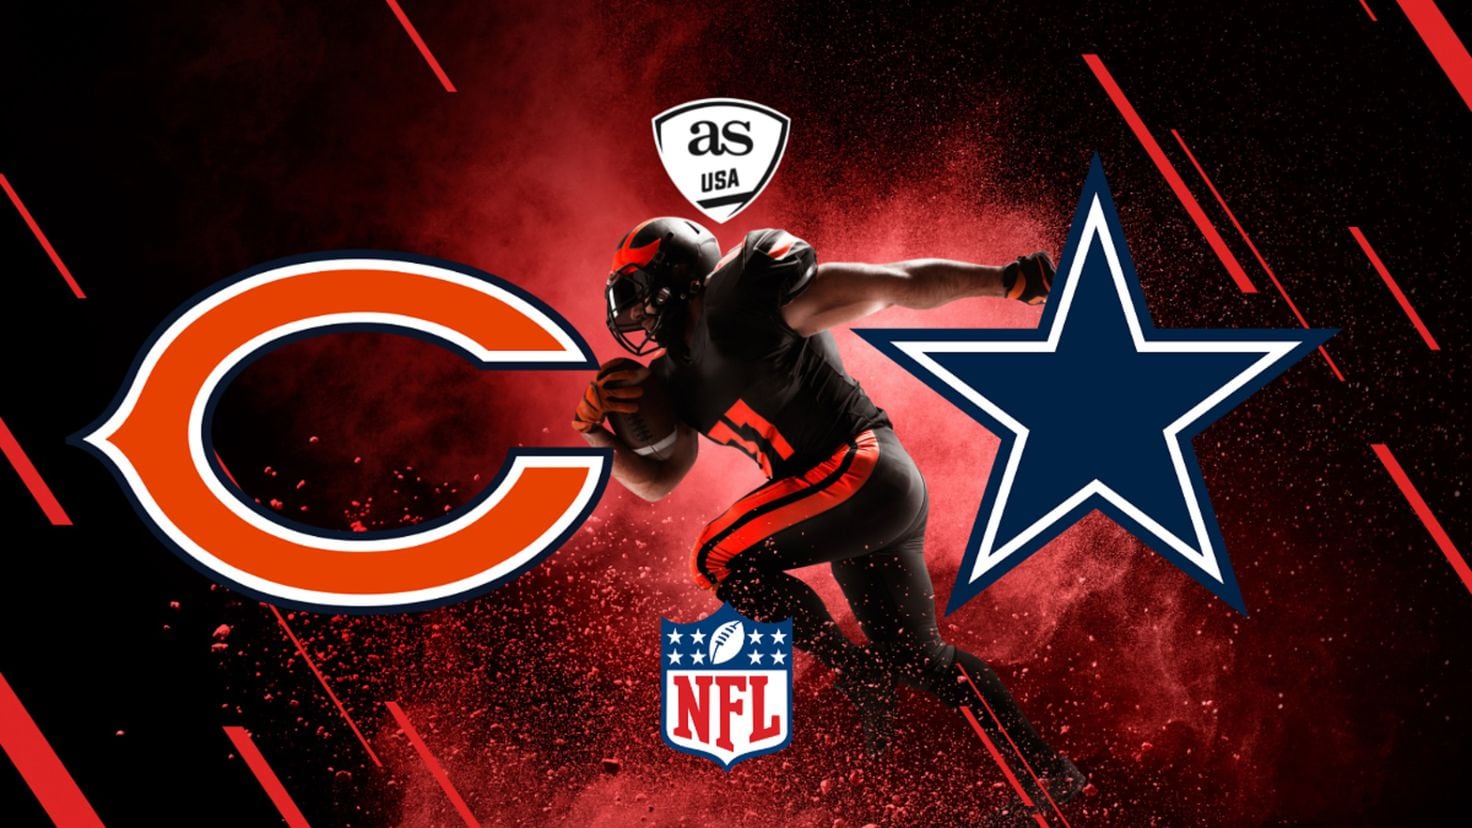 Bears vs Cowboys times, how to watch on TV, stream online AS USA